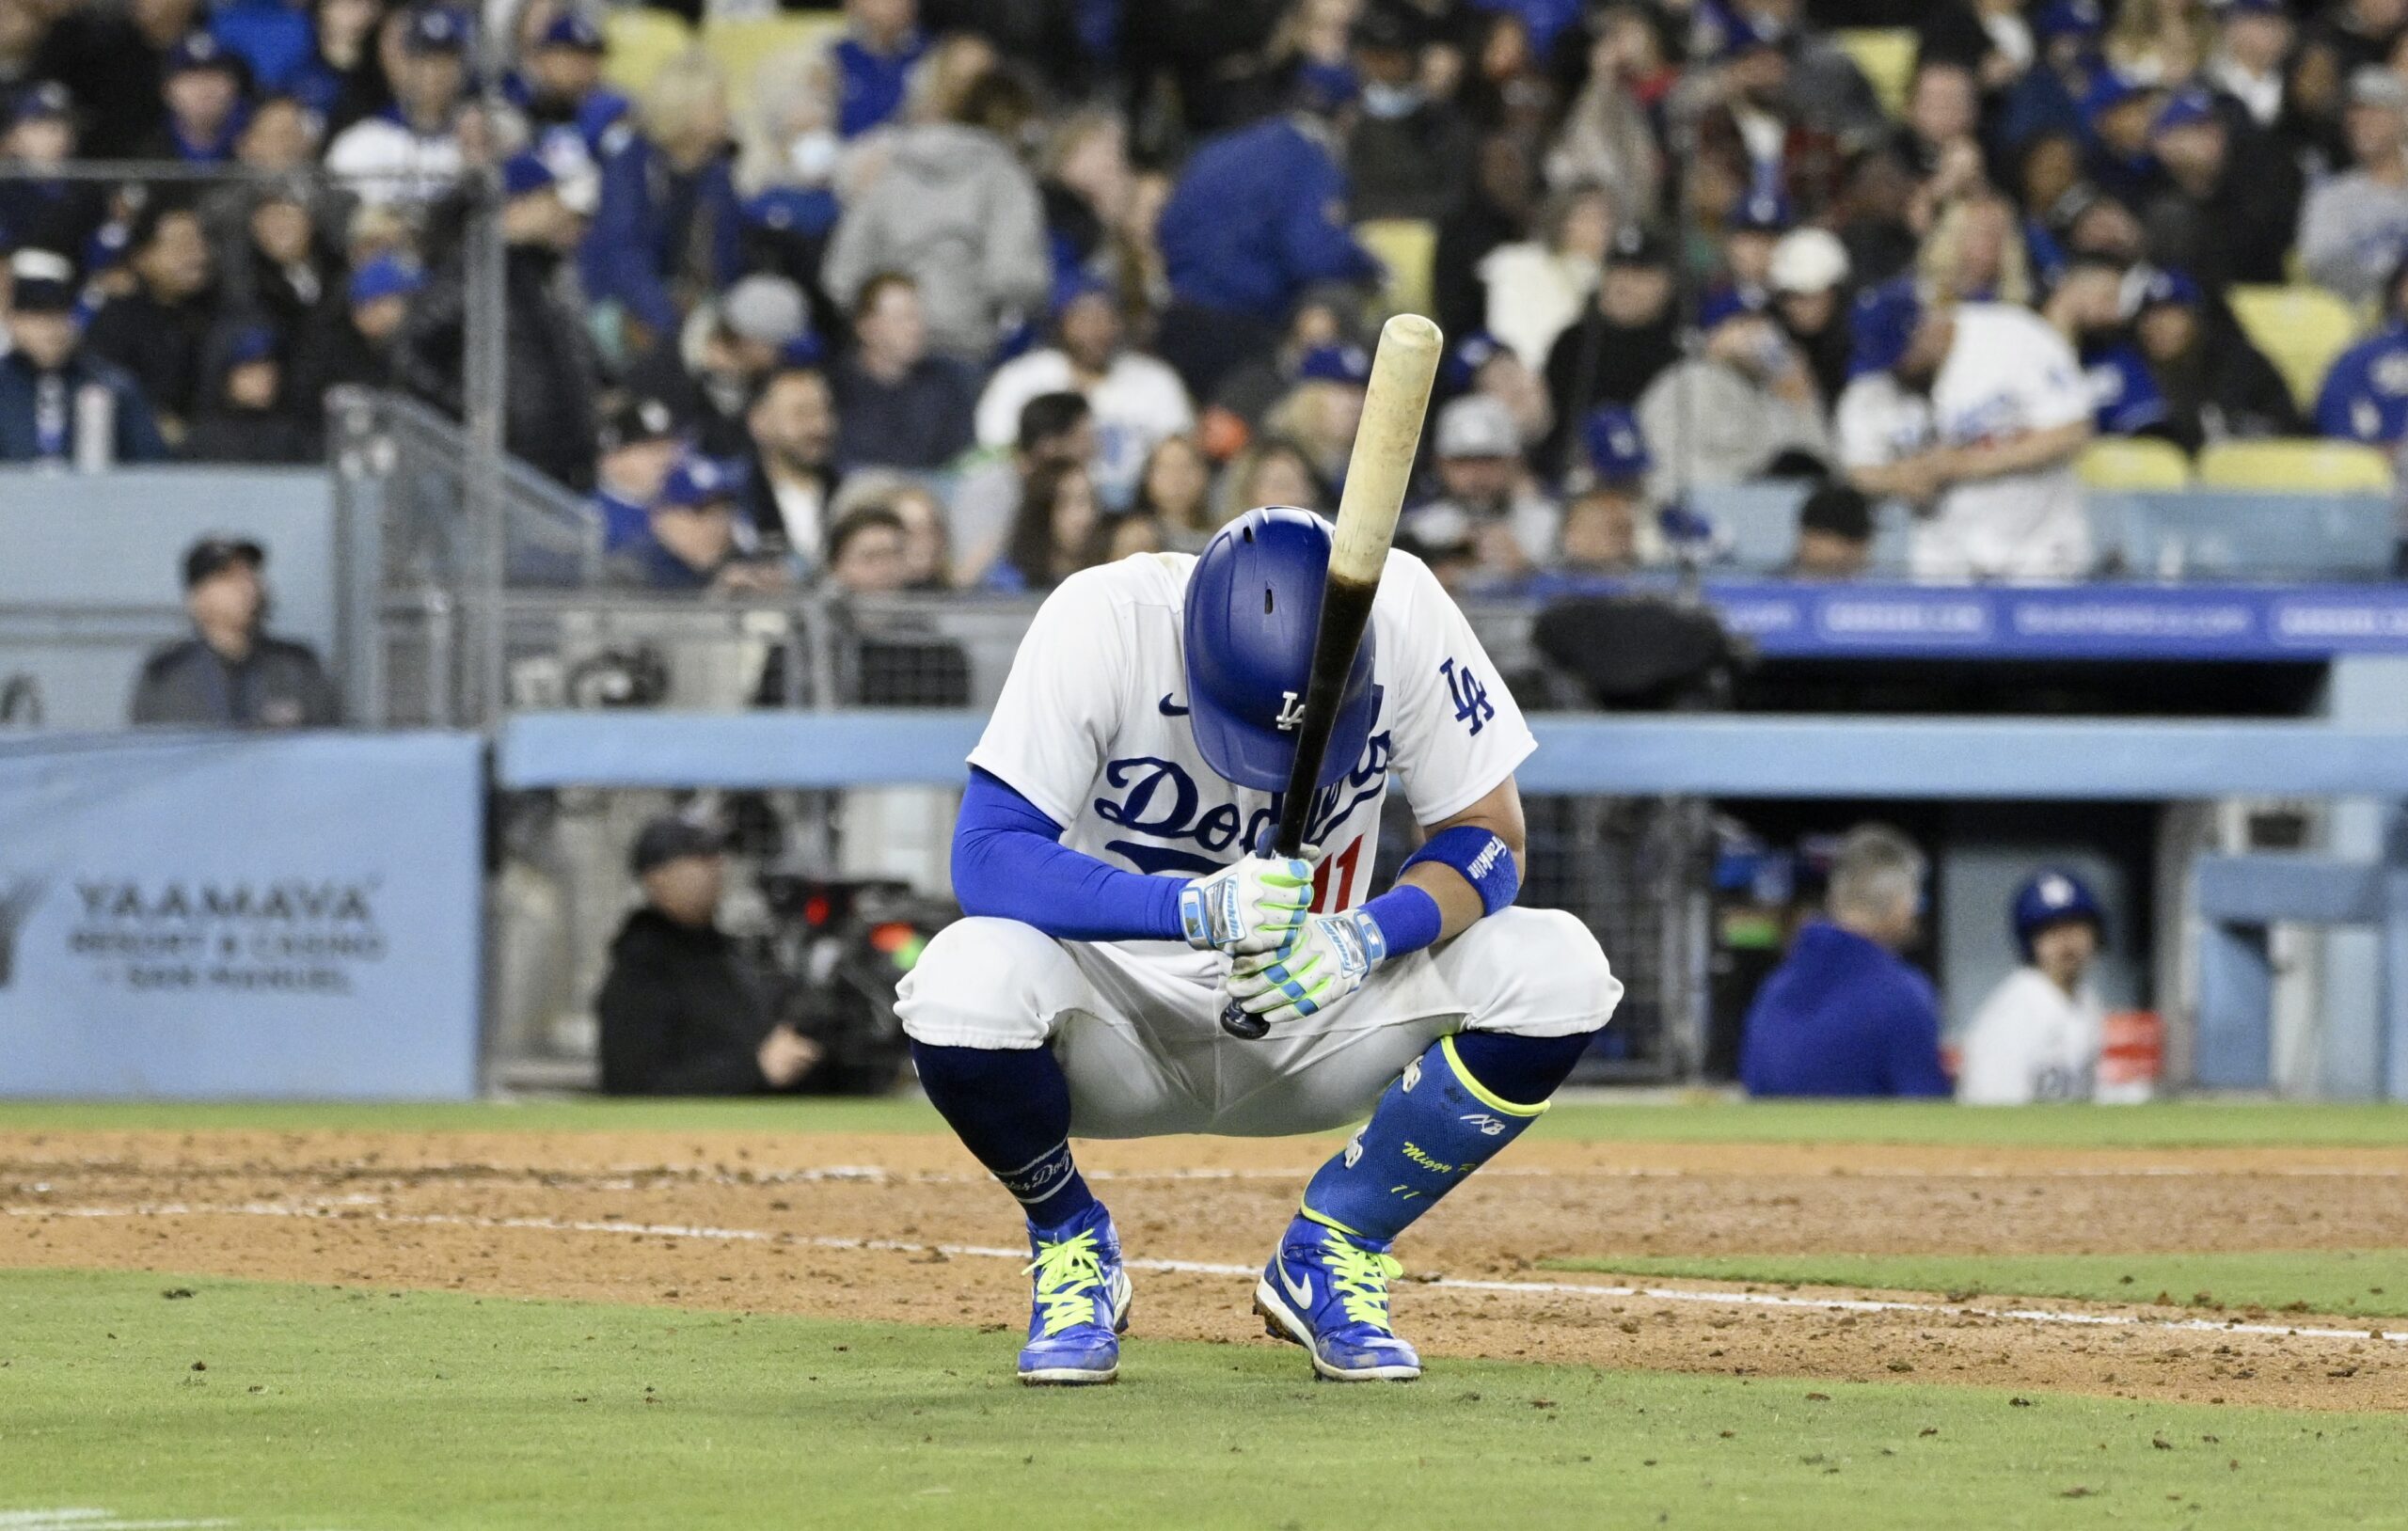 The Dodgers’ Miguel Rojas shows his frustration after lining out...